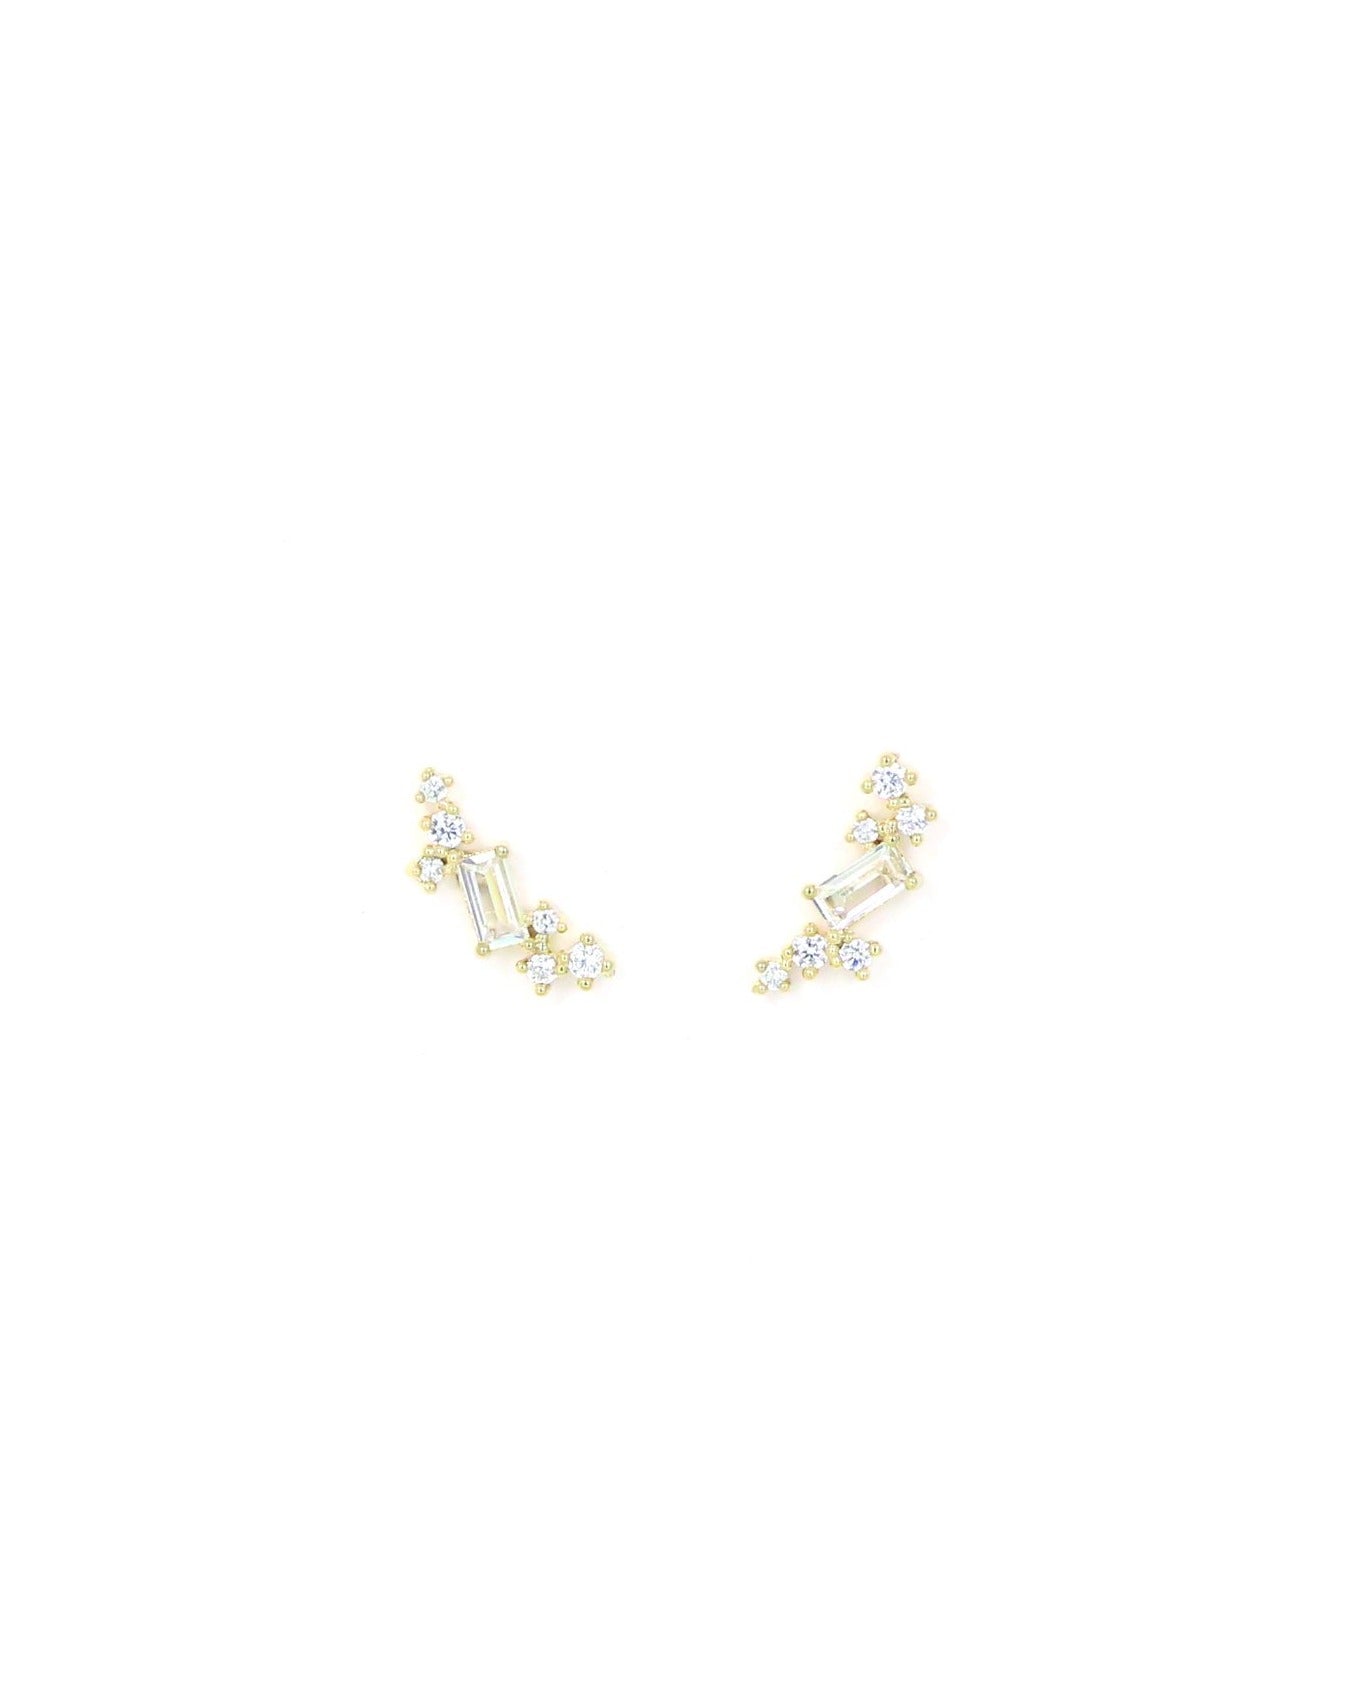 Laurel Climber Earrings - Lover's Tempo Jewelry